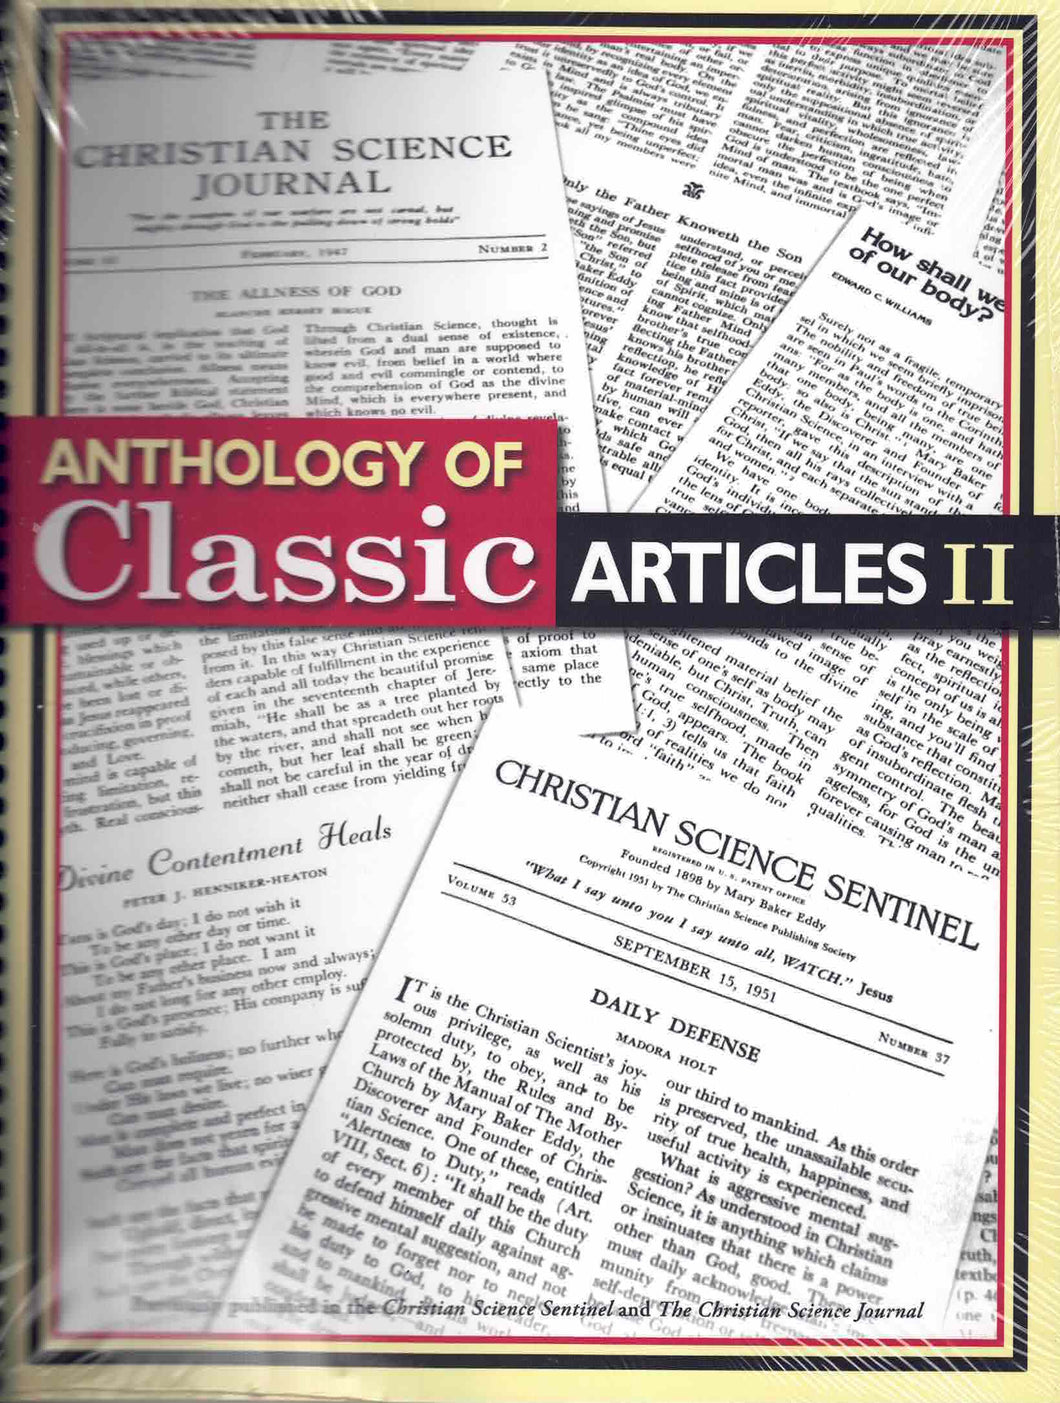 Anthology of Classic Articles II